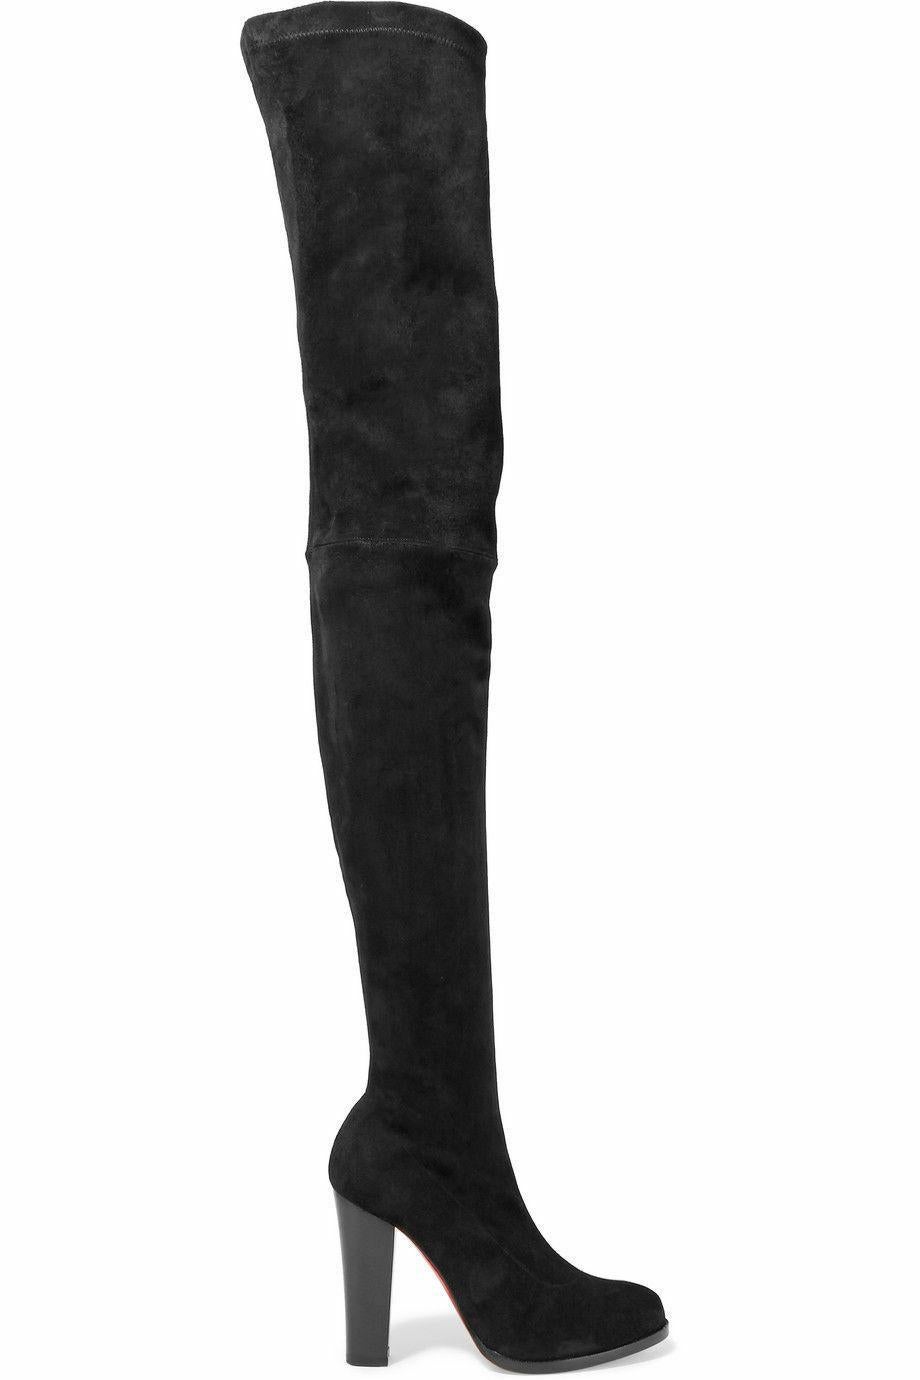 new CHRISTIAN LOUBOUTIN Verusch 100 black suede high heel over knee boots EU39
CHRISTIAN LOUBOUTIN
Verusch 100. 
ISecond-skin fit. 
Velvety black suede. 
Mid- thigh length. 
Stacked block heel. 
Zip fastening along side. 
Tan leather lining. 
Lighly